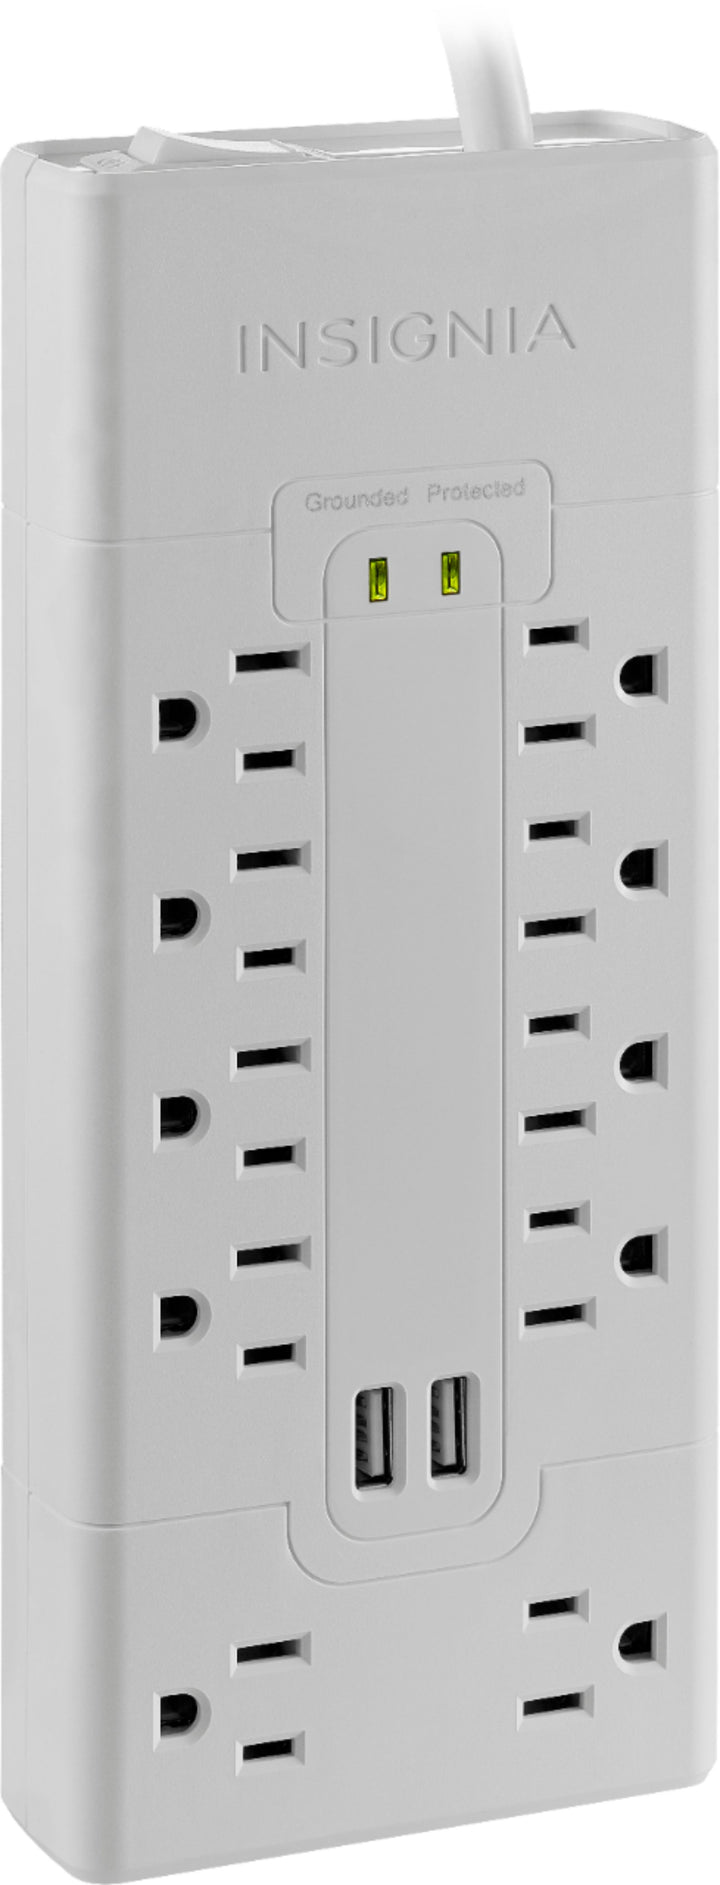 Insignia™ - 10-Outlet/2-USB Surge Protector - White_2